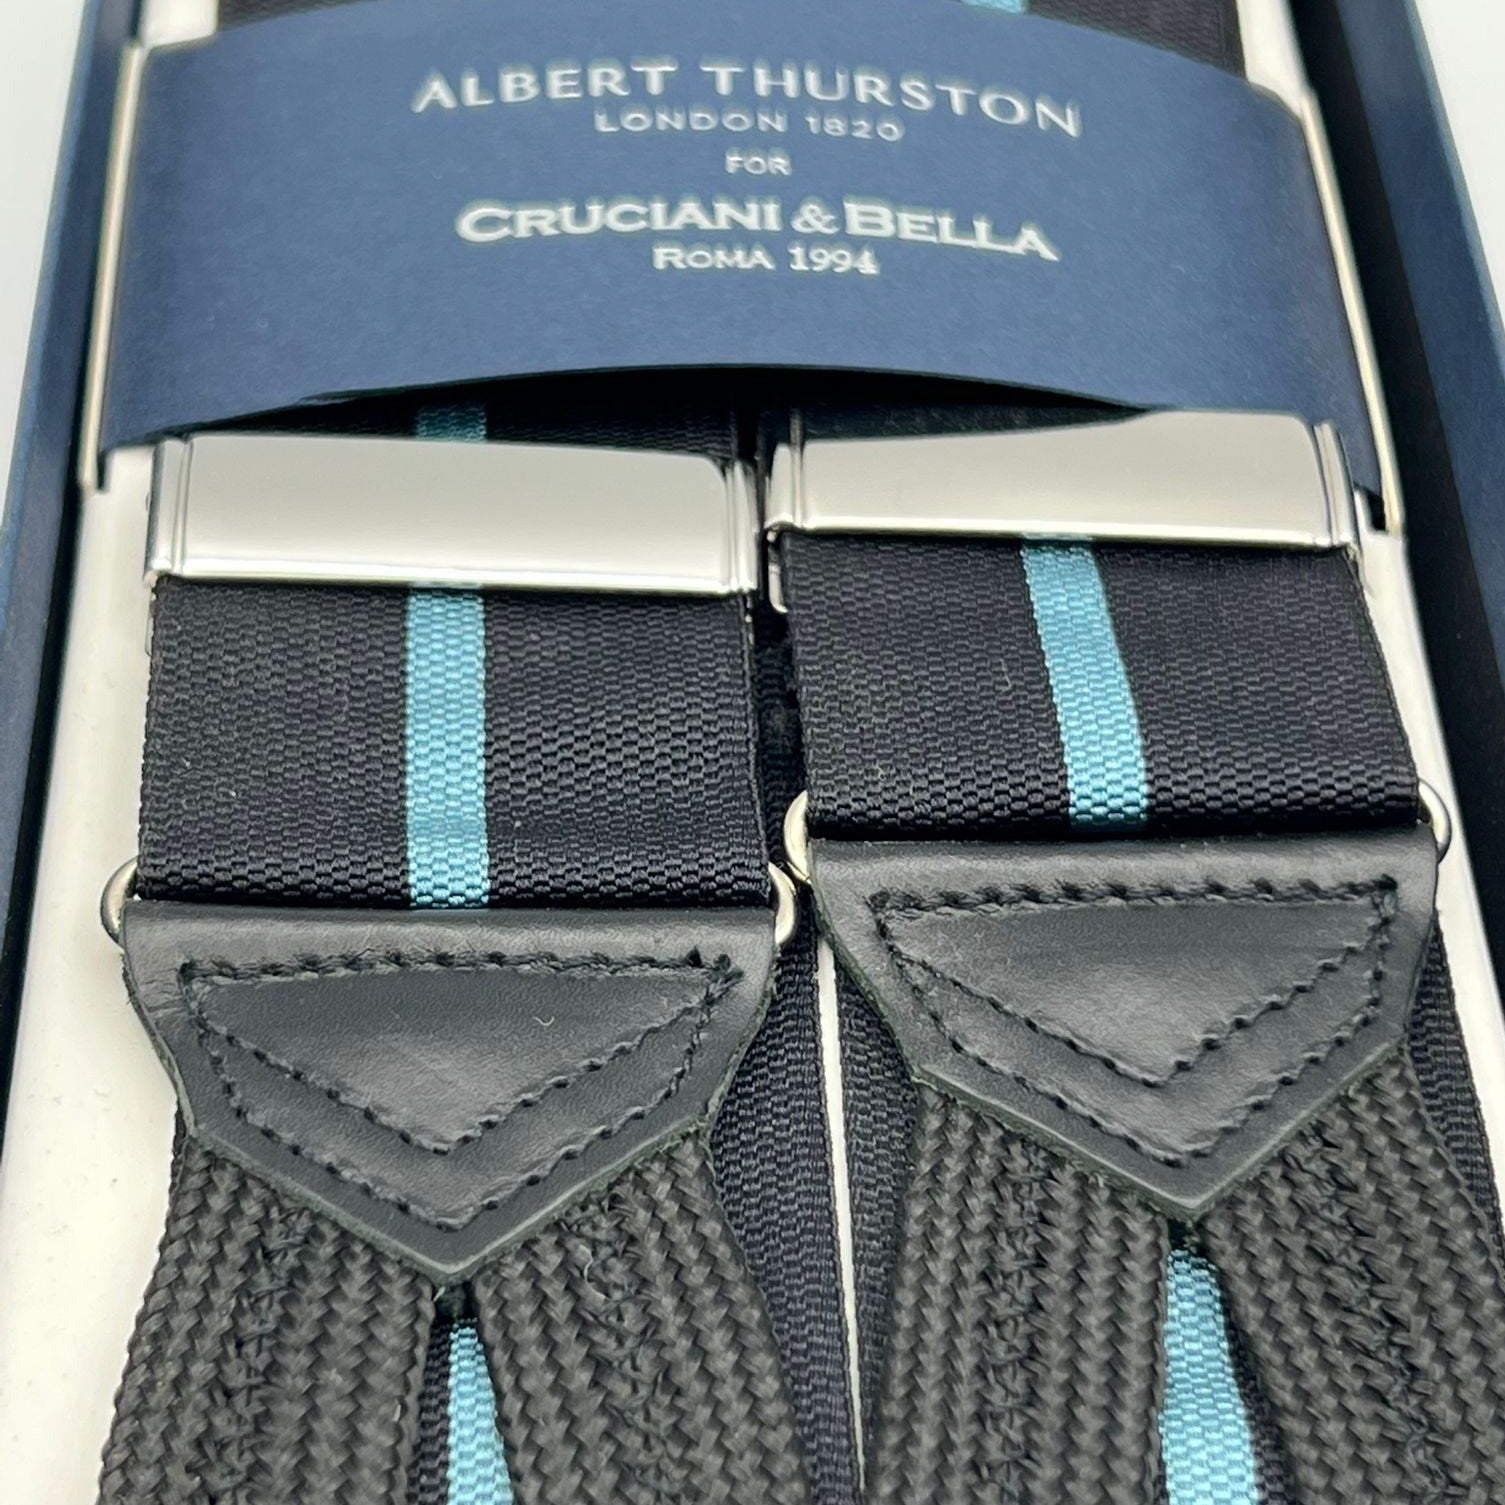 Albert Thurston for Cruciani & Bella Made in England Adjustable Sizing 40 mm Woven Barathea  Dark and Blue Stripes  Braces Y-Shaped Nickel Fittings Size: XL 6774